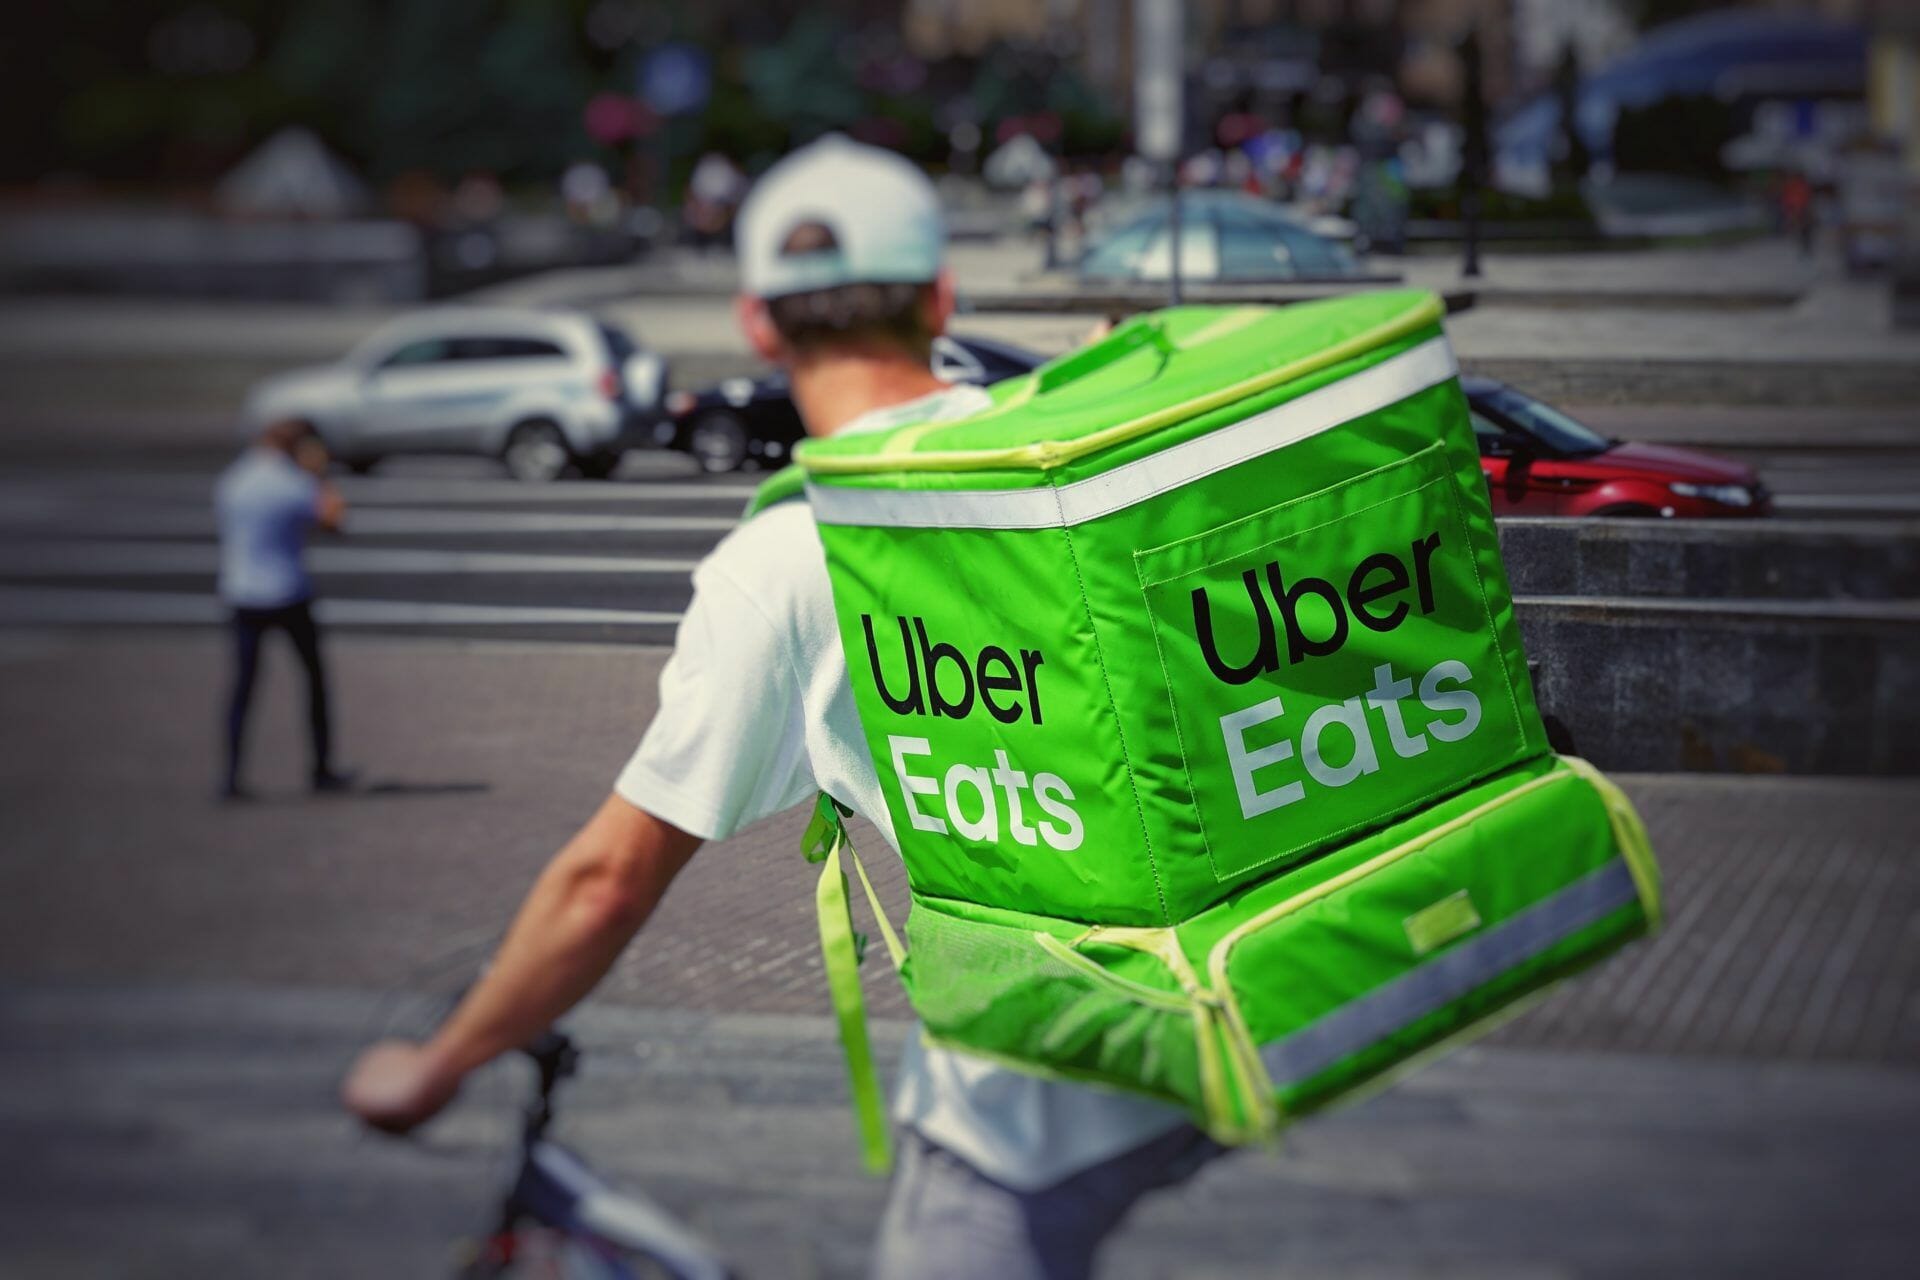 Uber Eats Pizza delivery